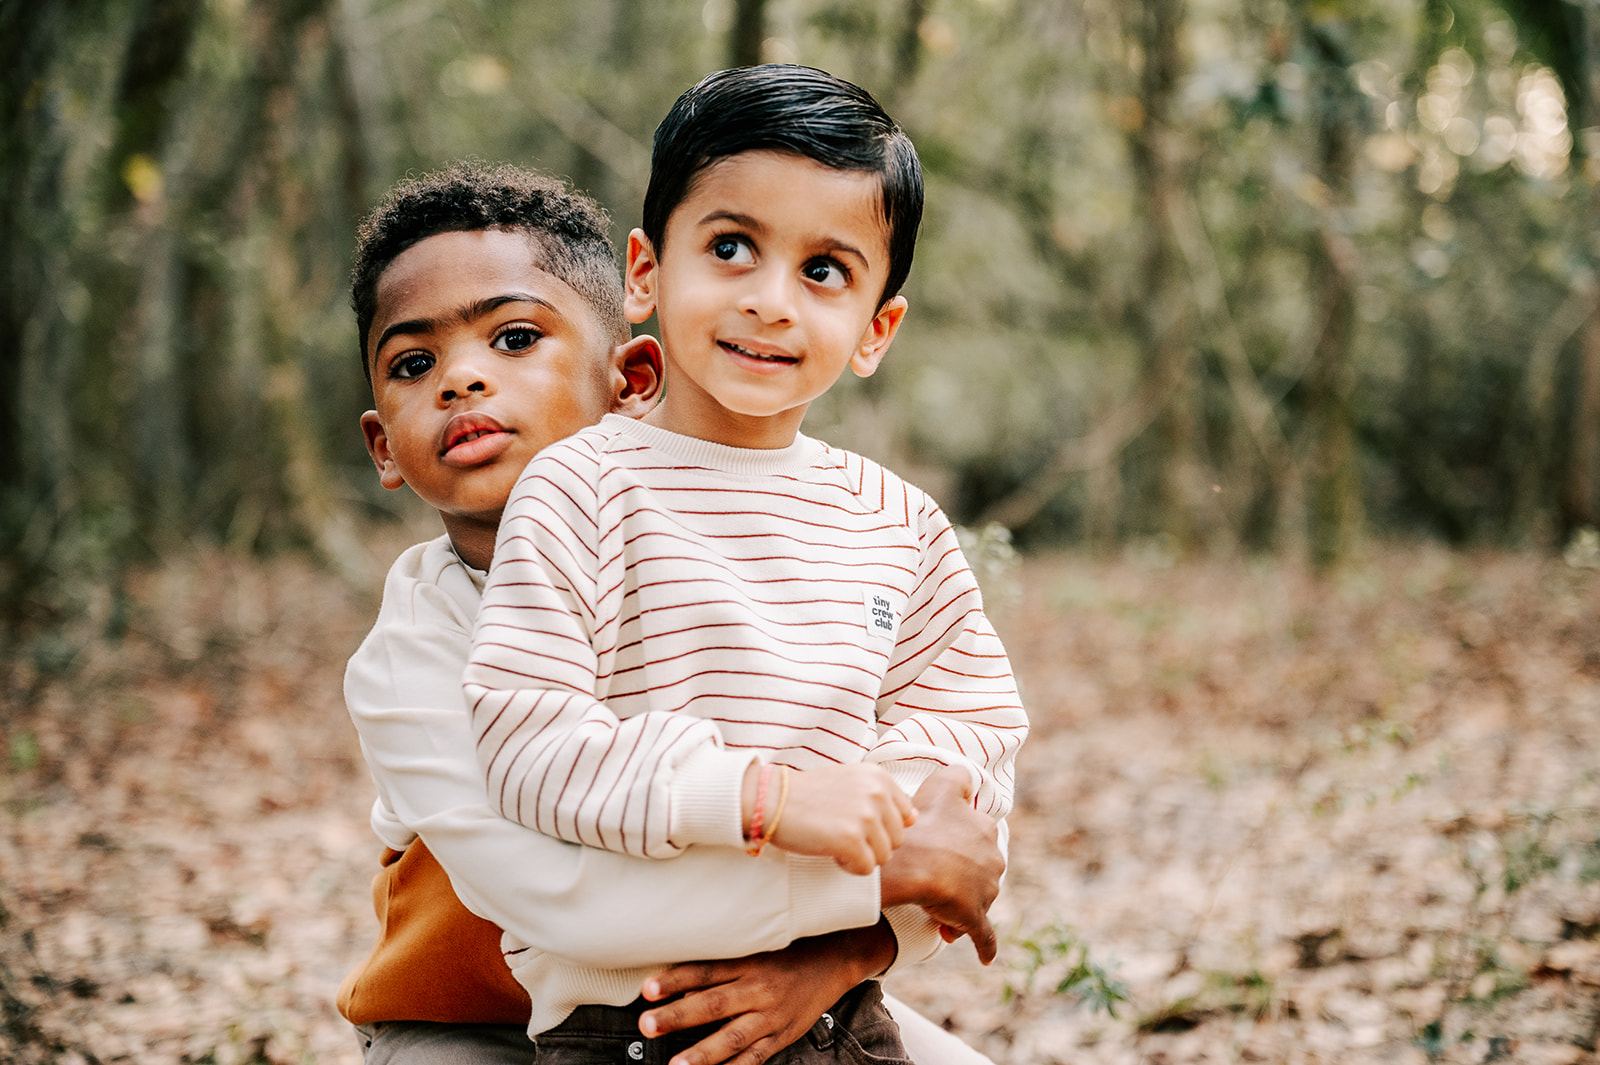 A young boy hugs his younger cousin from behind while standing in a forest Kaleideum